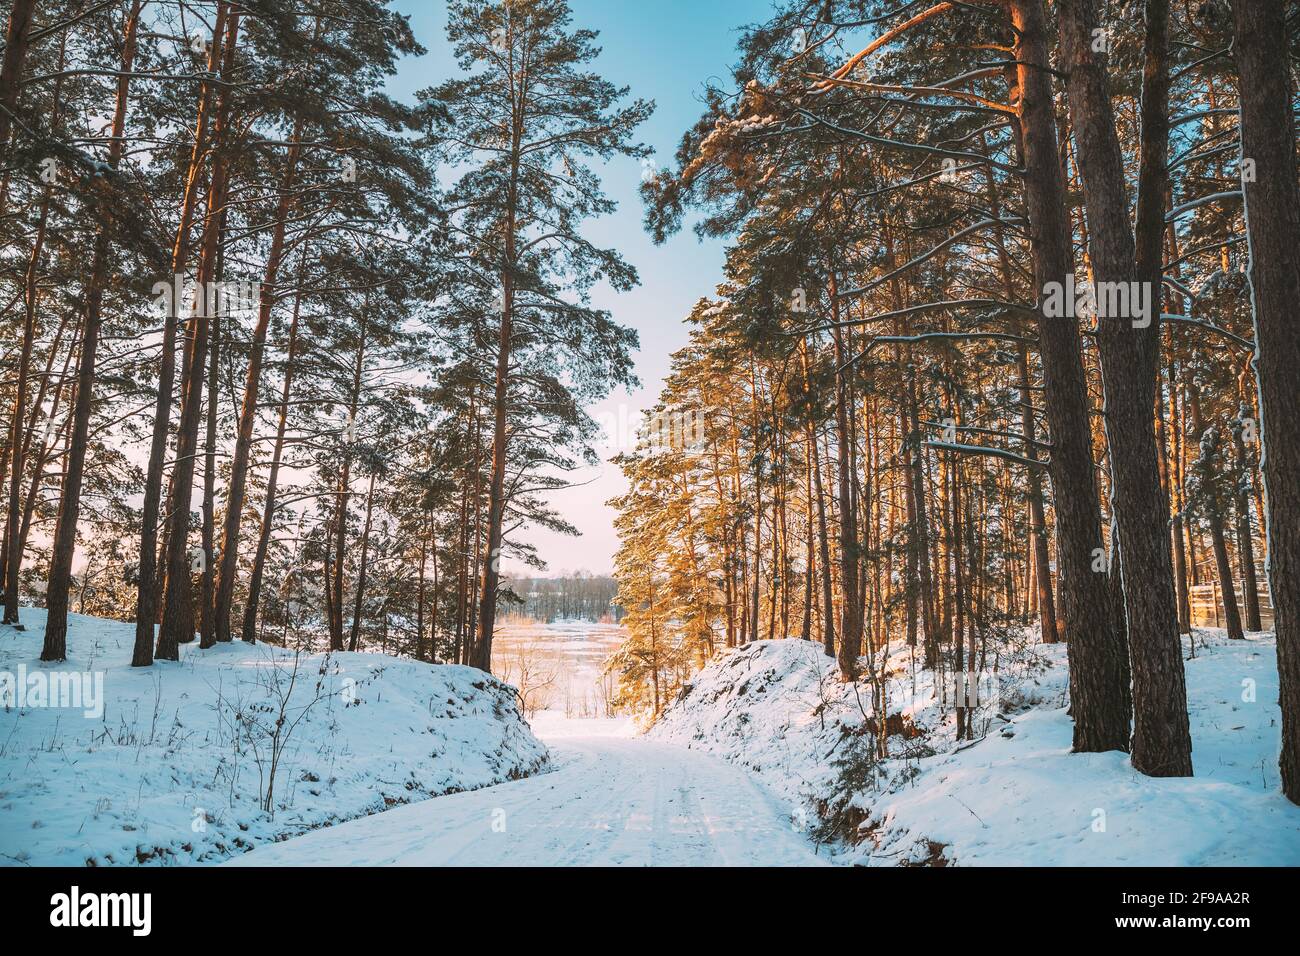 Country Road Through Snowy Winter Pine Forest. Winter Snowy Coniferous Forest Landscape. Beautiful Woods In Forest Landscape Stock Photo